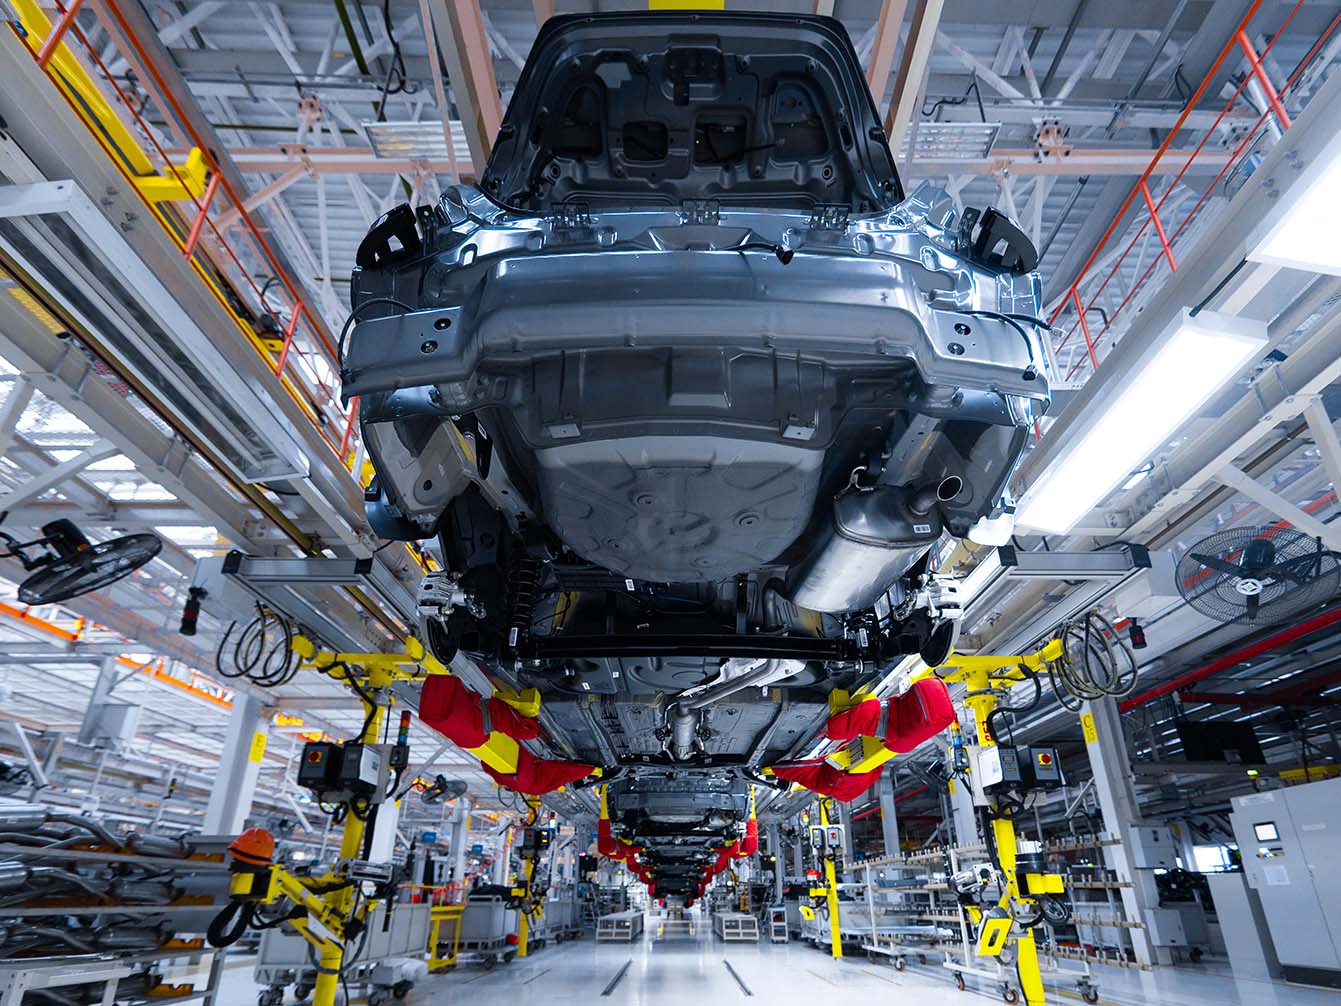 Digitization and automation in the automotive industry